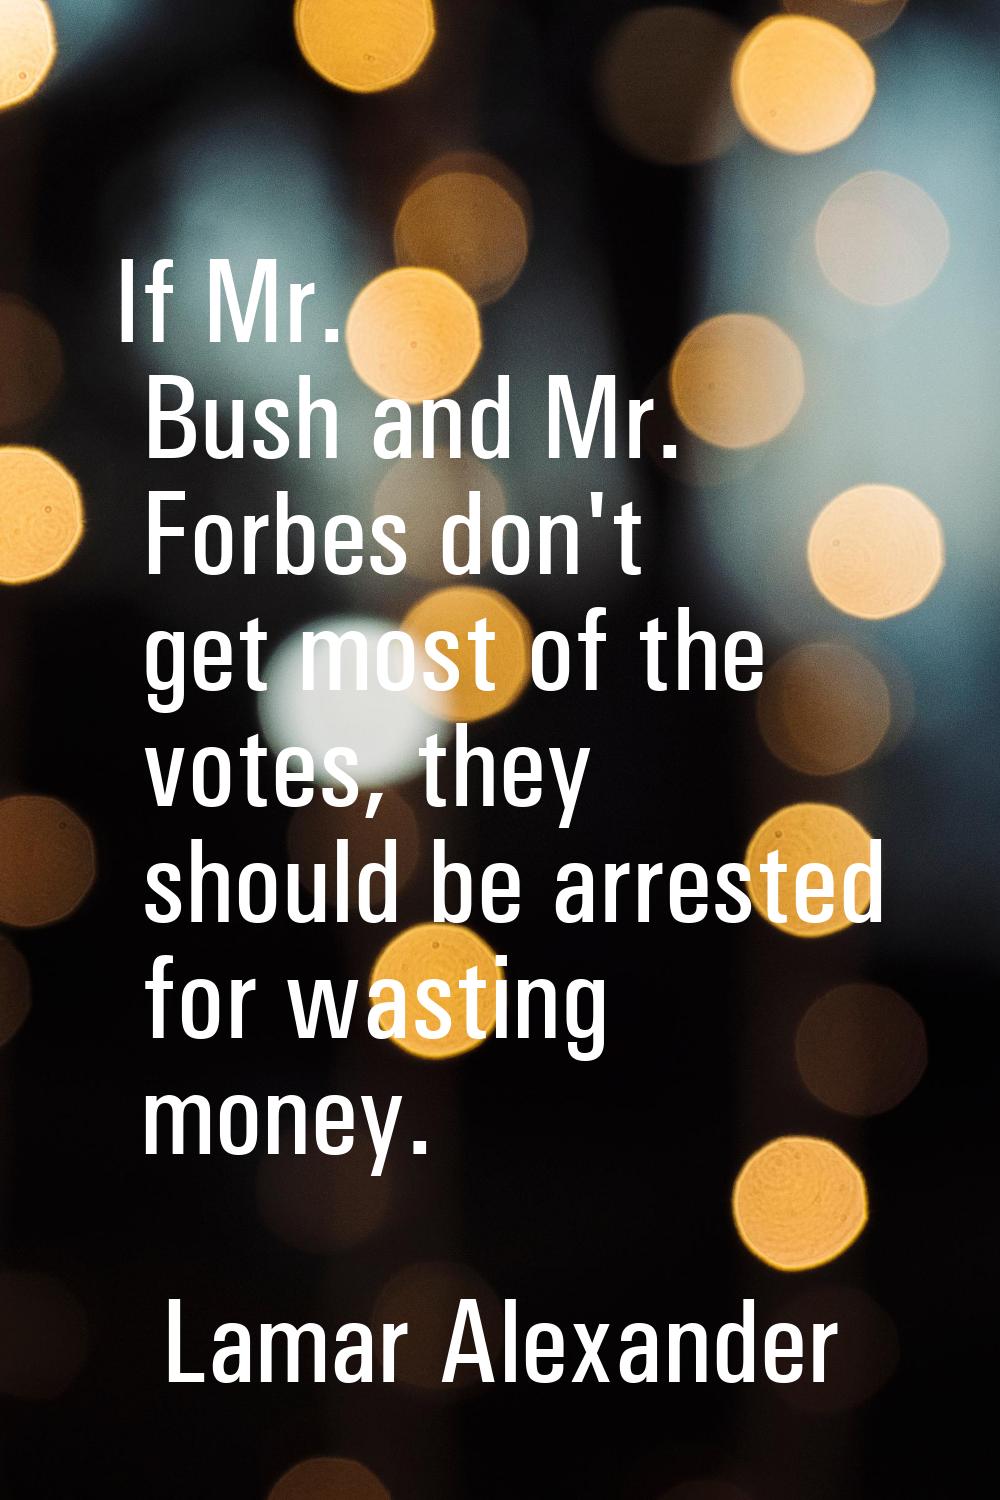 If Mr. Bush and Mr. Forbes don't get most of the votes, they should be arrested for wasting money.